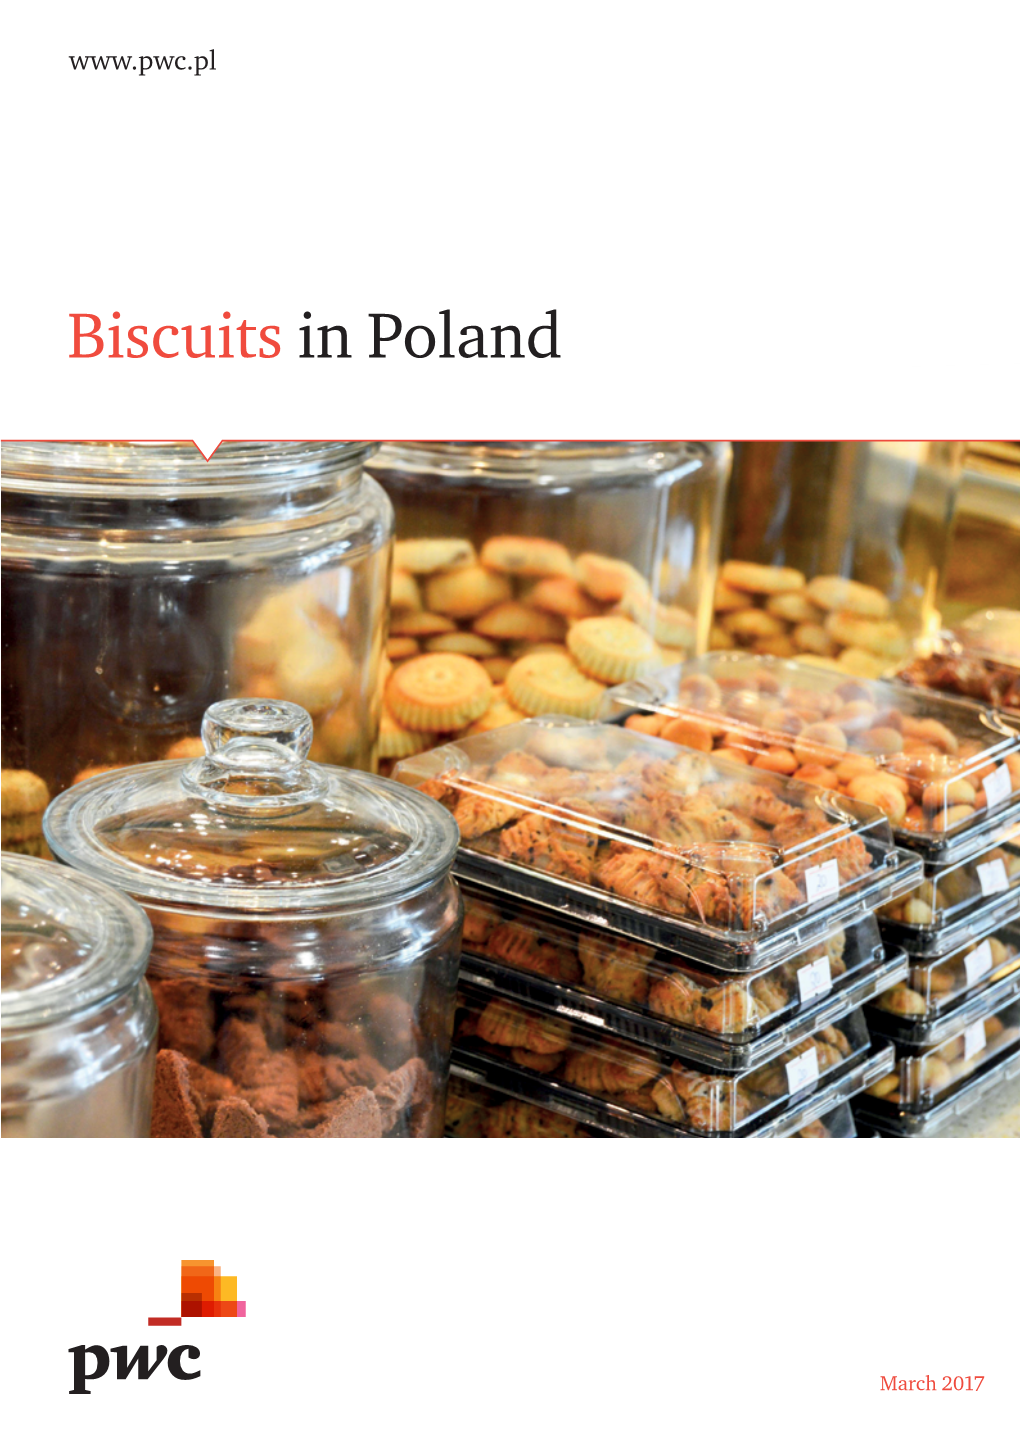 Biscuits in Poland